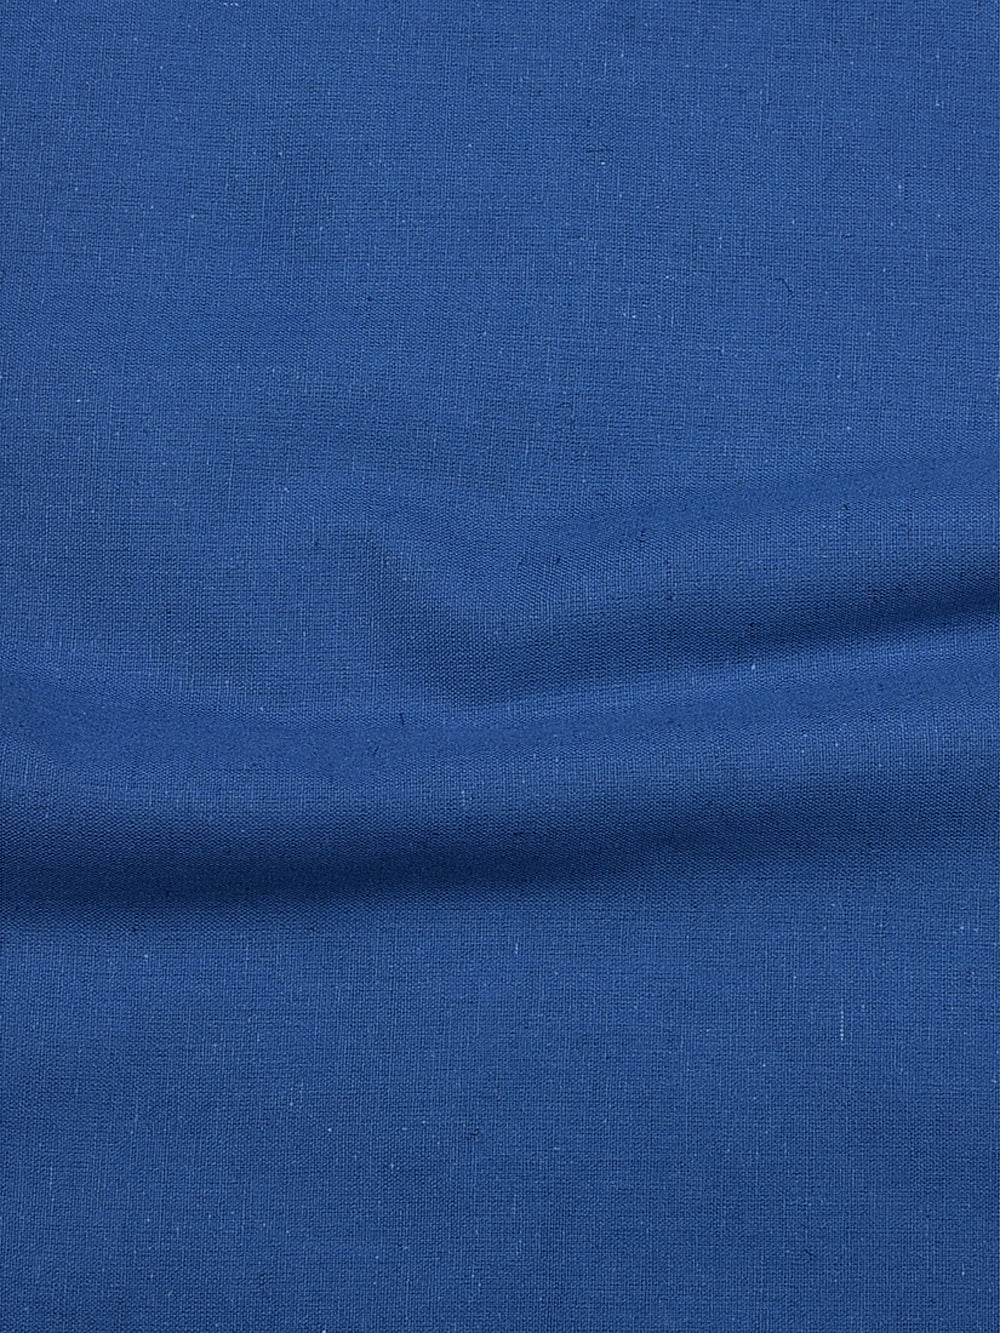 CF-20 Shade Solid Dyed Woven Cotton Flex Fabric